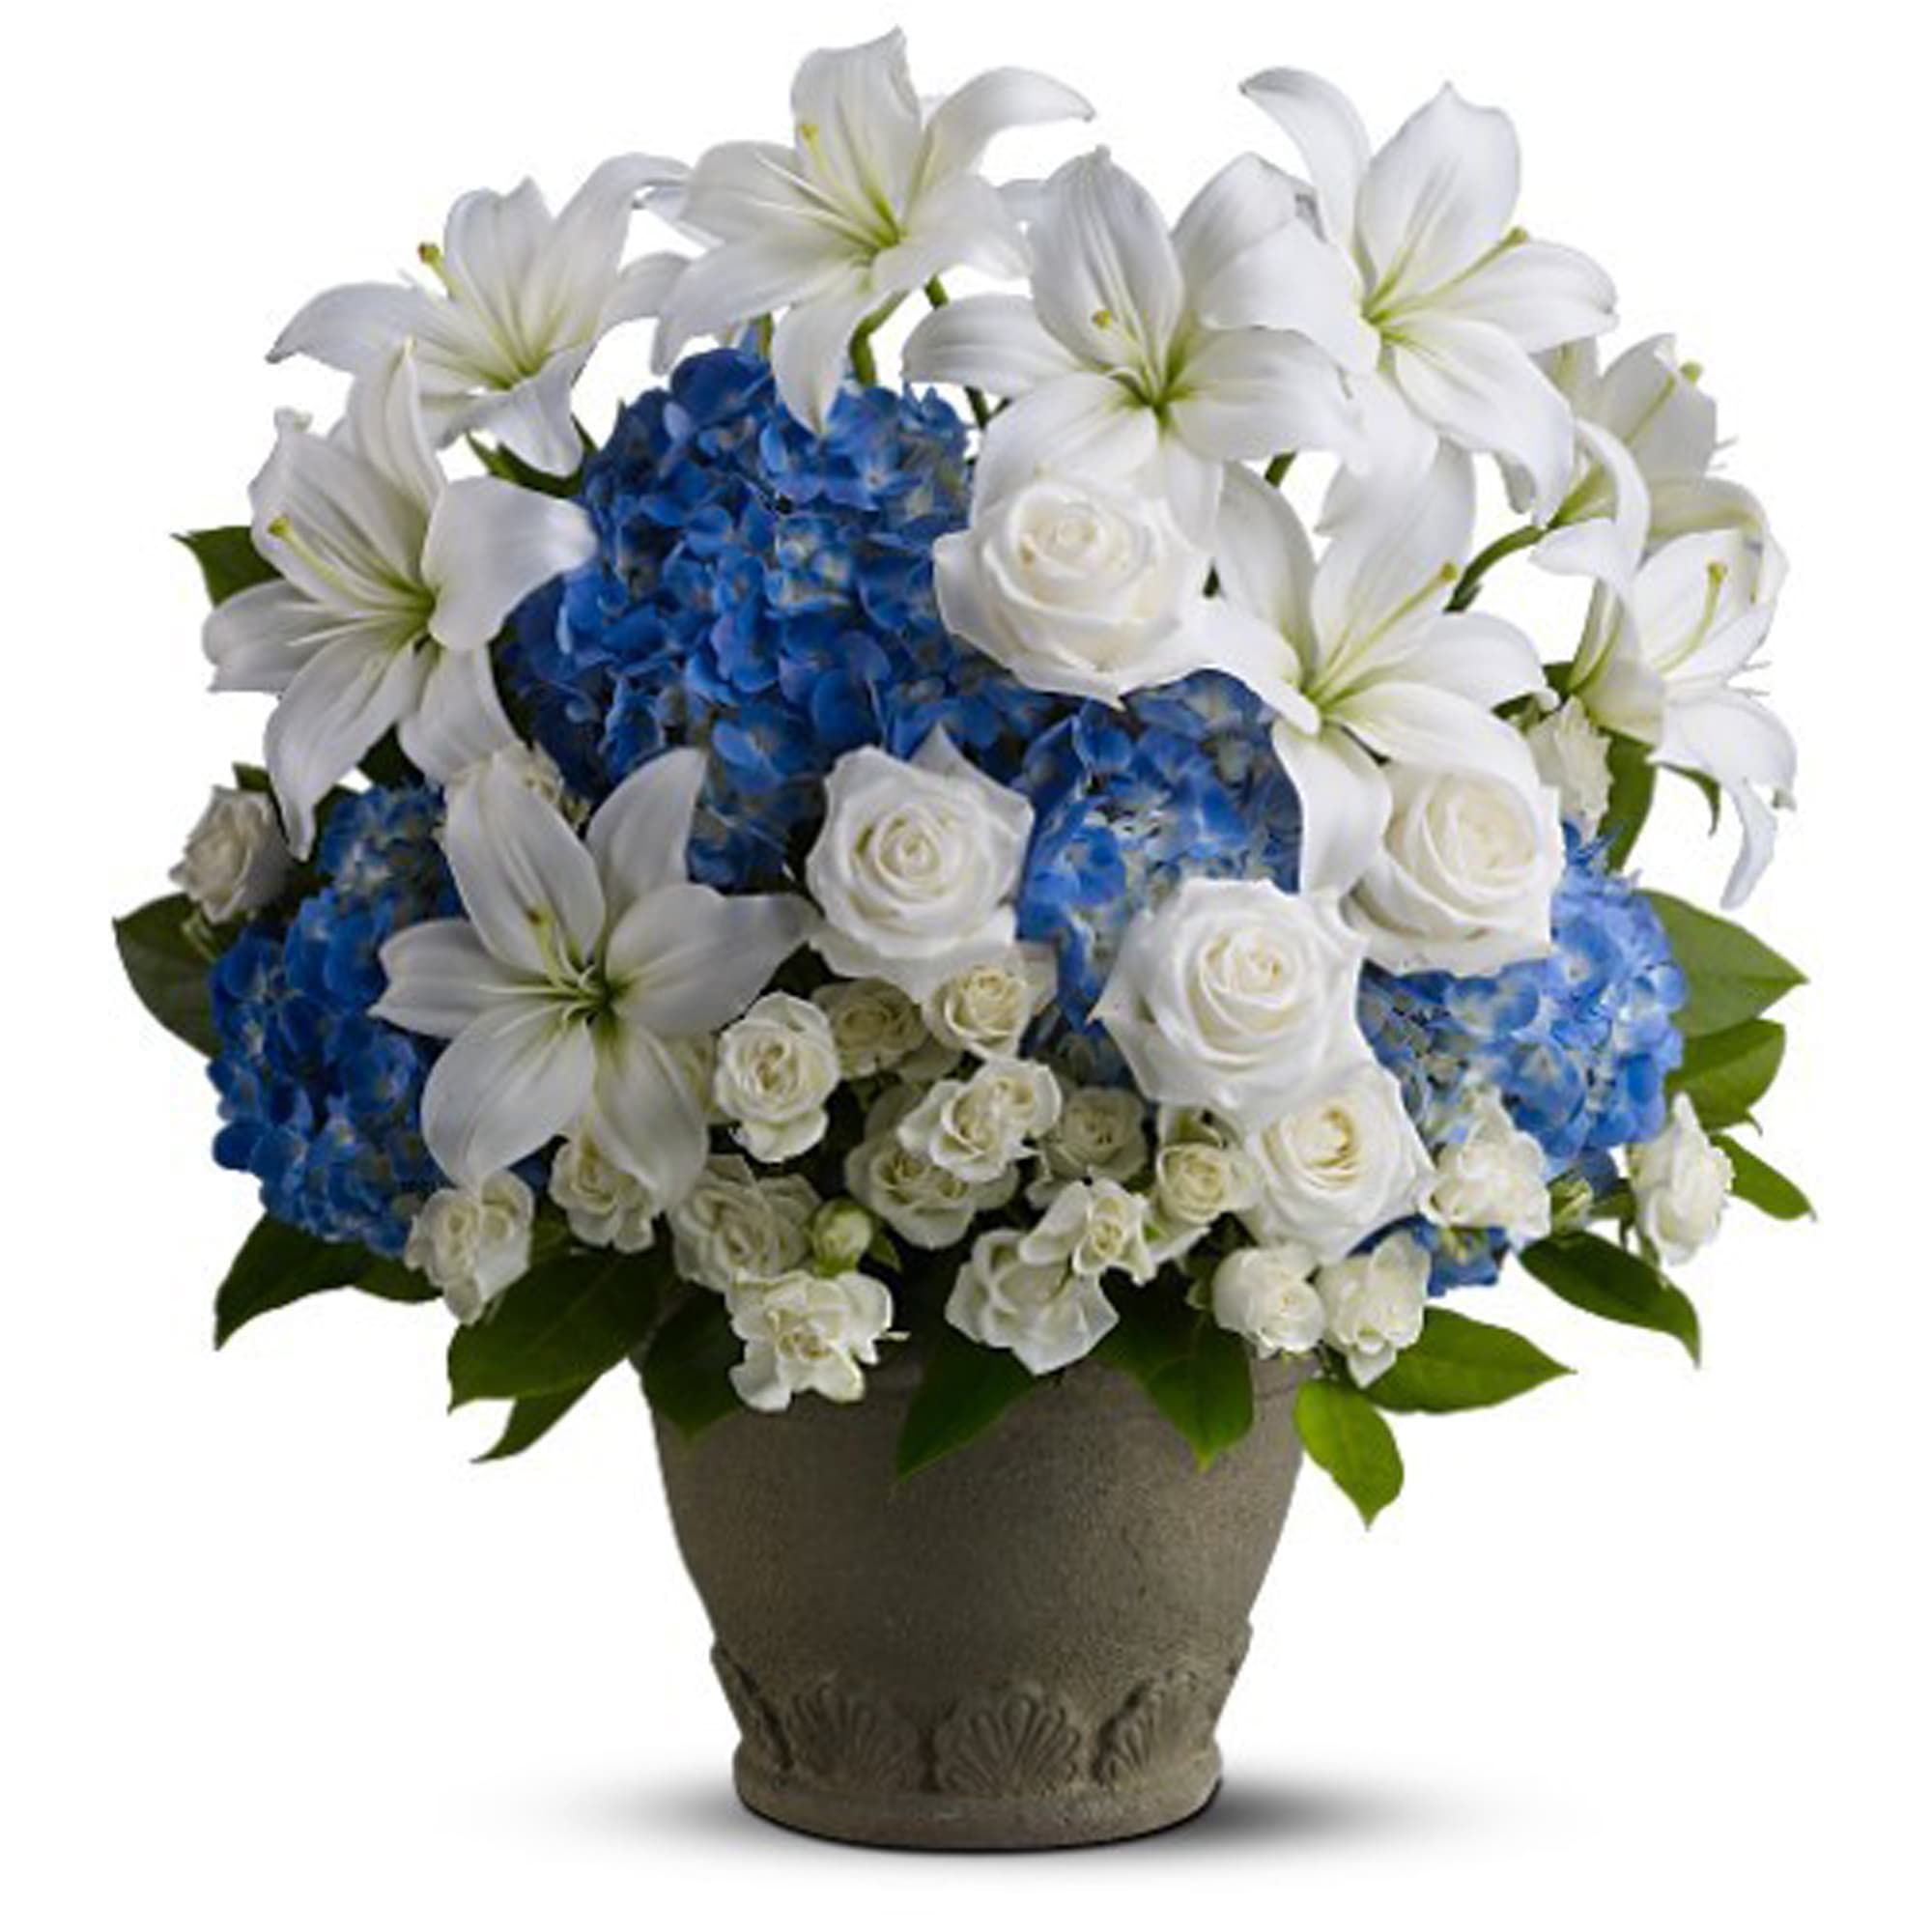 Teleflora's Tranquil Seas  - Say farewell to a beloved friend, family member or business associate with a serene blend of white and blue blossoms, reminiscent of the peaceful sea. This charming bouquet - hand-delivered in a classic urn - will be a thoughtful reminder of your devotion.    A mix of fresh blue and white flowers such as roses, Asiatic lilies and hydrangea is delivered in Telefloraâs Grecian Garden urn.    Approximately 19&quot; (W) x 22&quot; (H)    Orientation: All-Around        As Shown : TFWEB560    